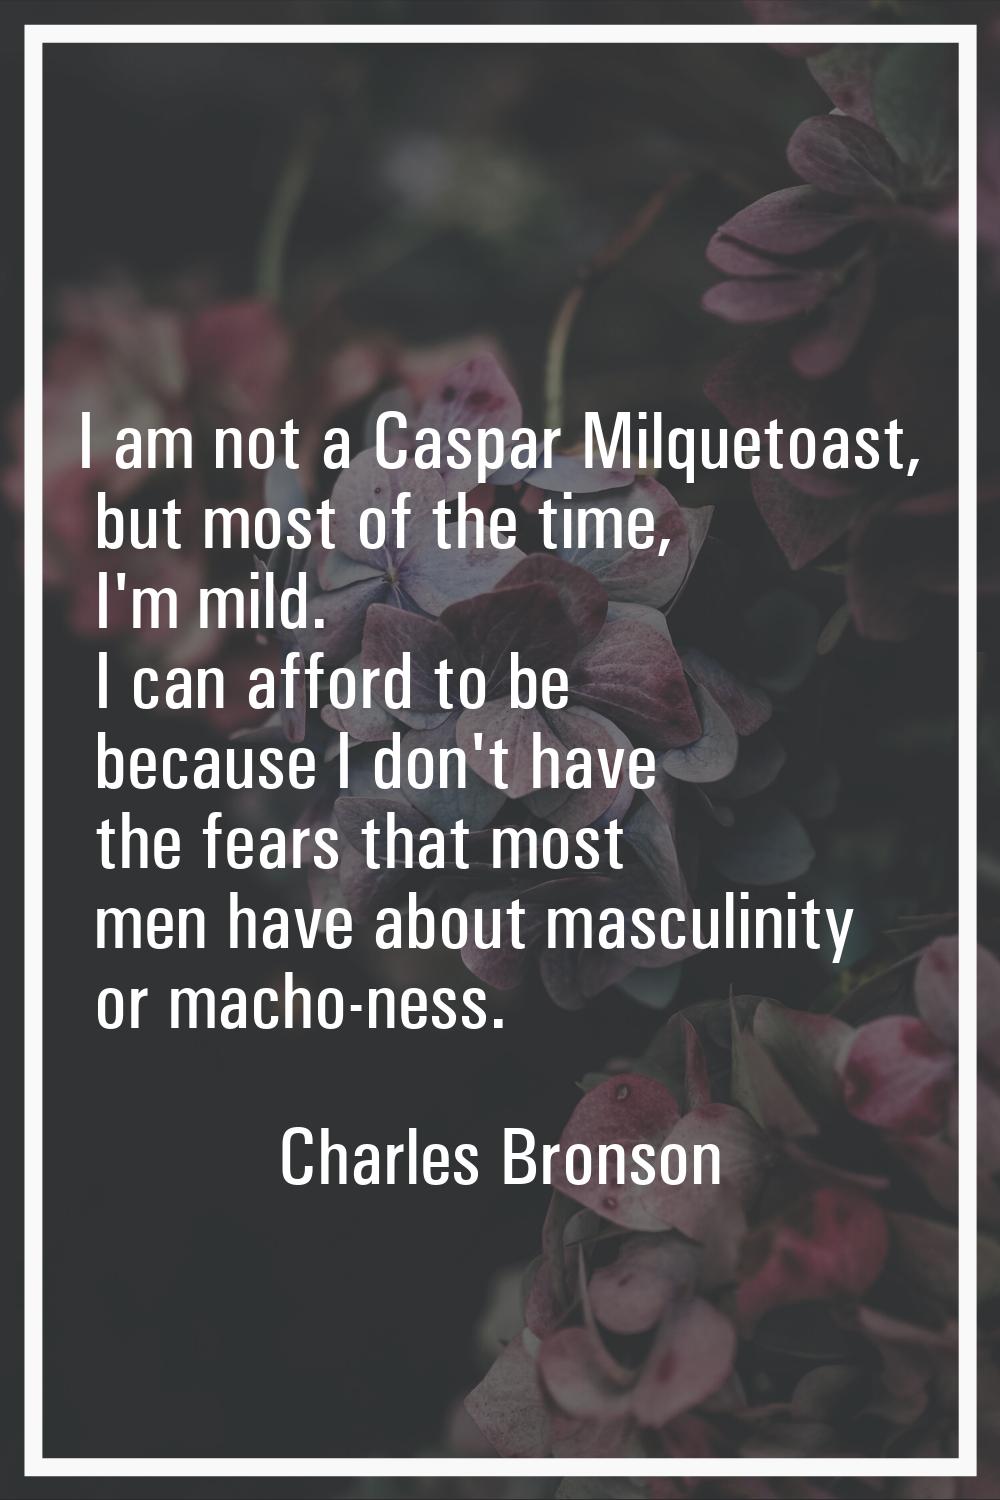 I am not a Caspar Milquetoast, but most of the time, I'm mild. I can afford to be because I don't h